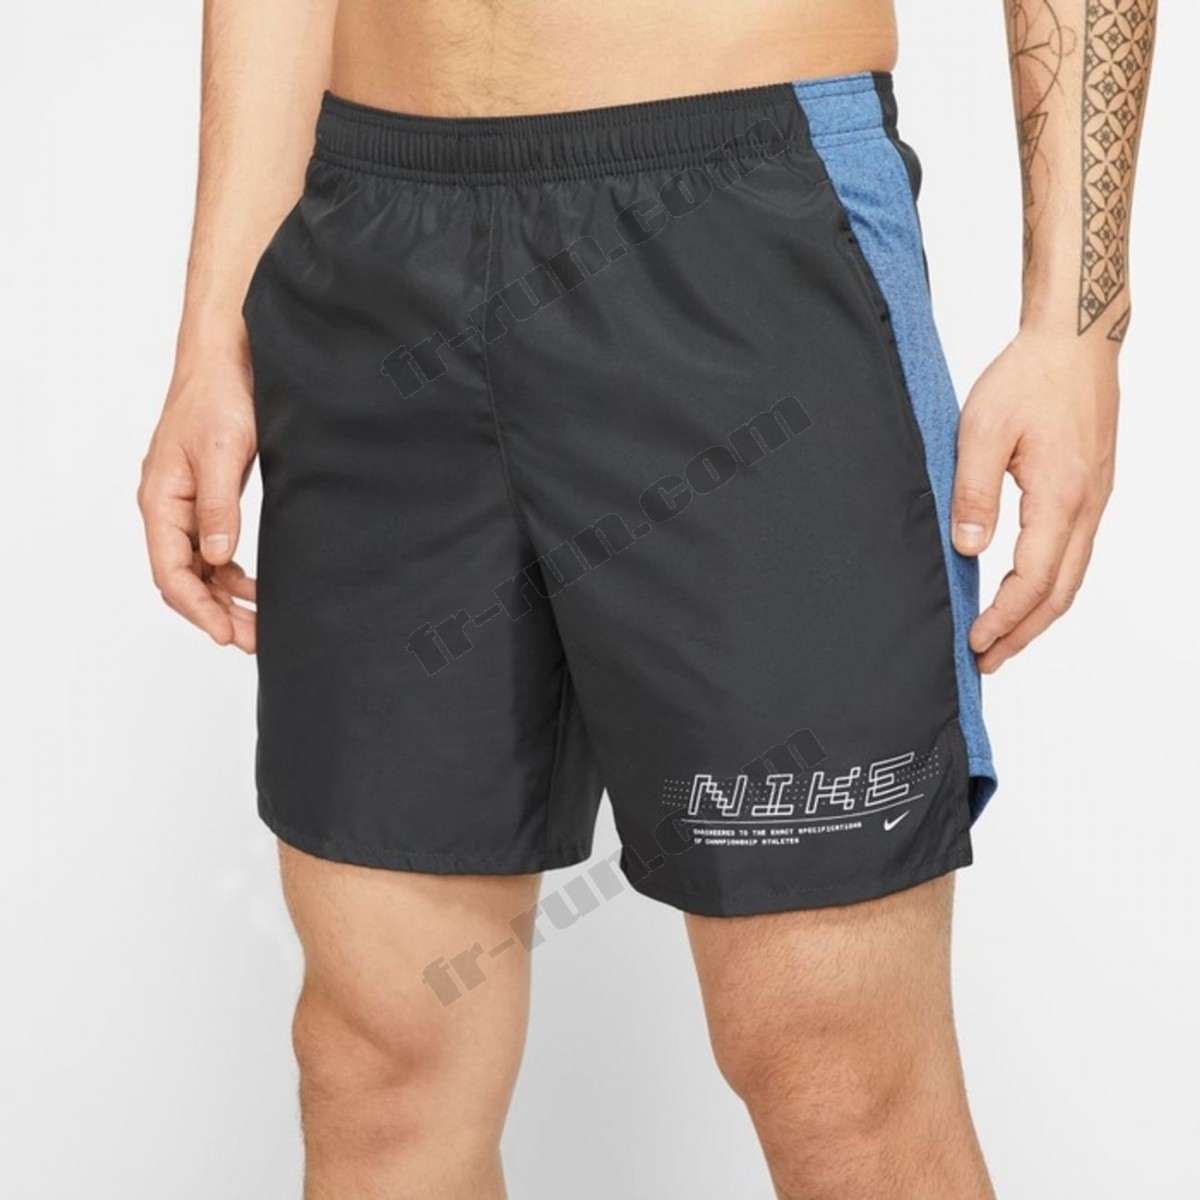 Nike/SHORT running homme NIKE CHLLGR SHORT 7IN BF GX FF √ Nouveau style √ Soldes - -0